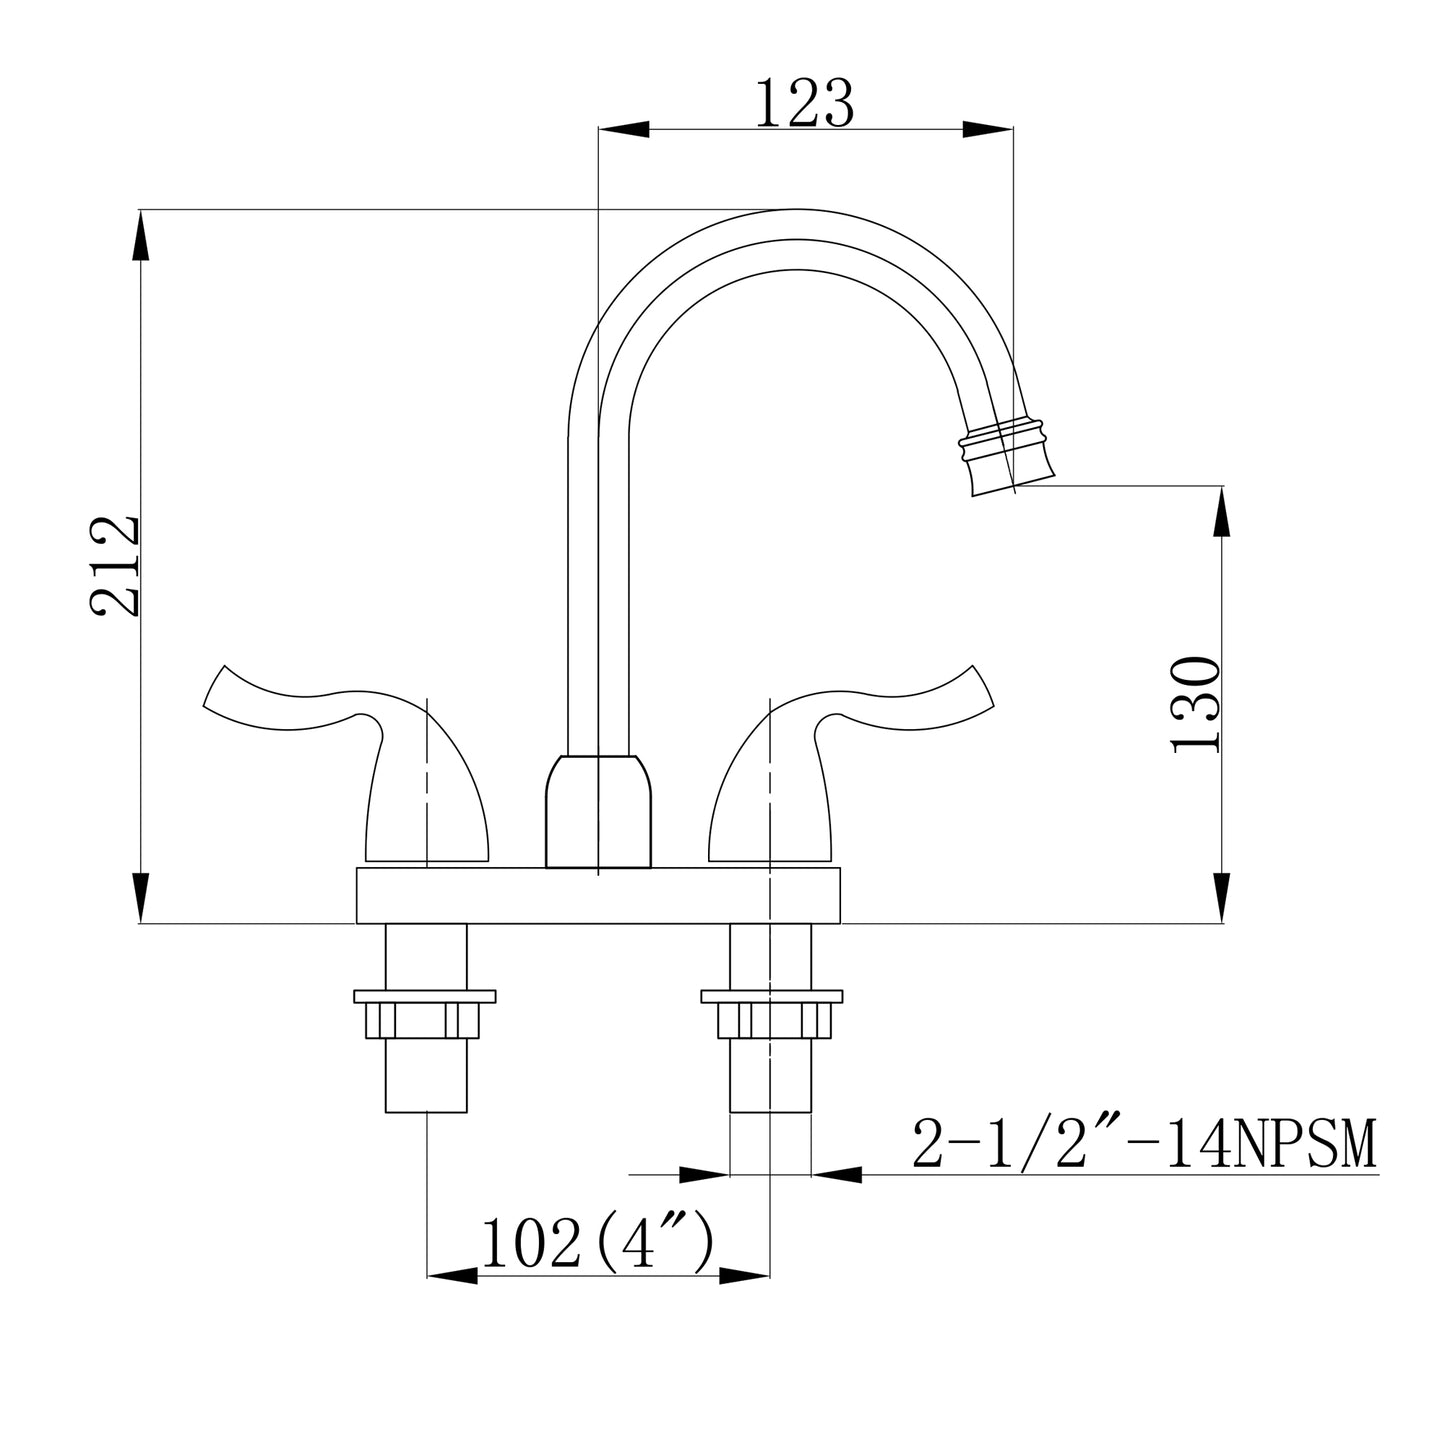 4 Inch Two-Handle Centerset Bathroom Faucet with Matte Black Finish